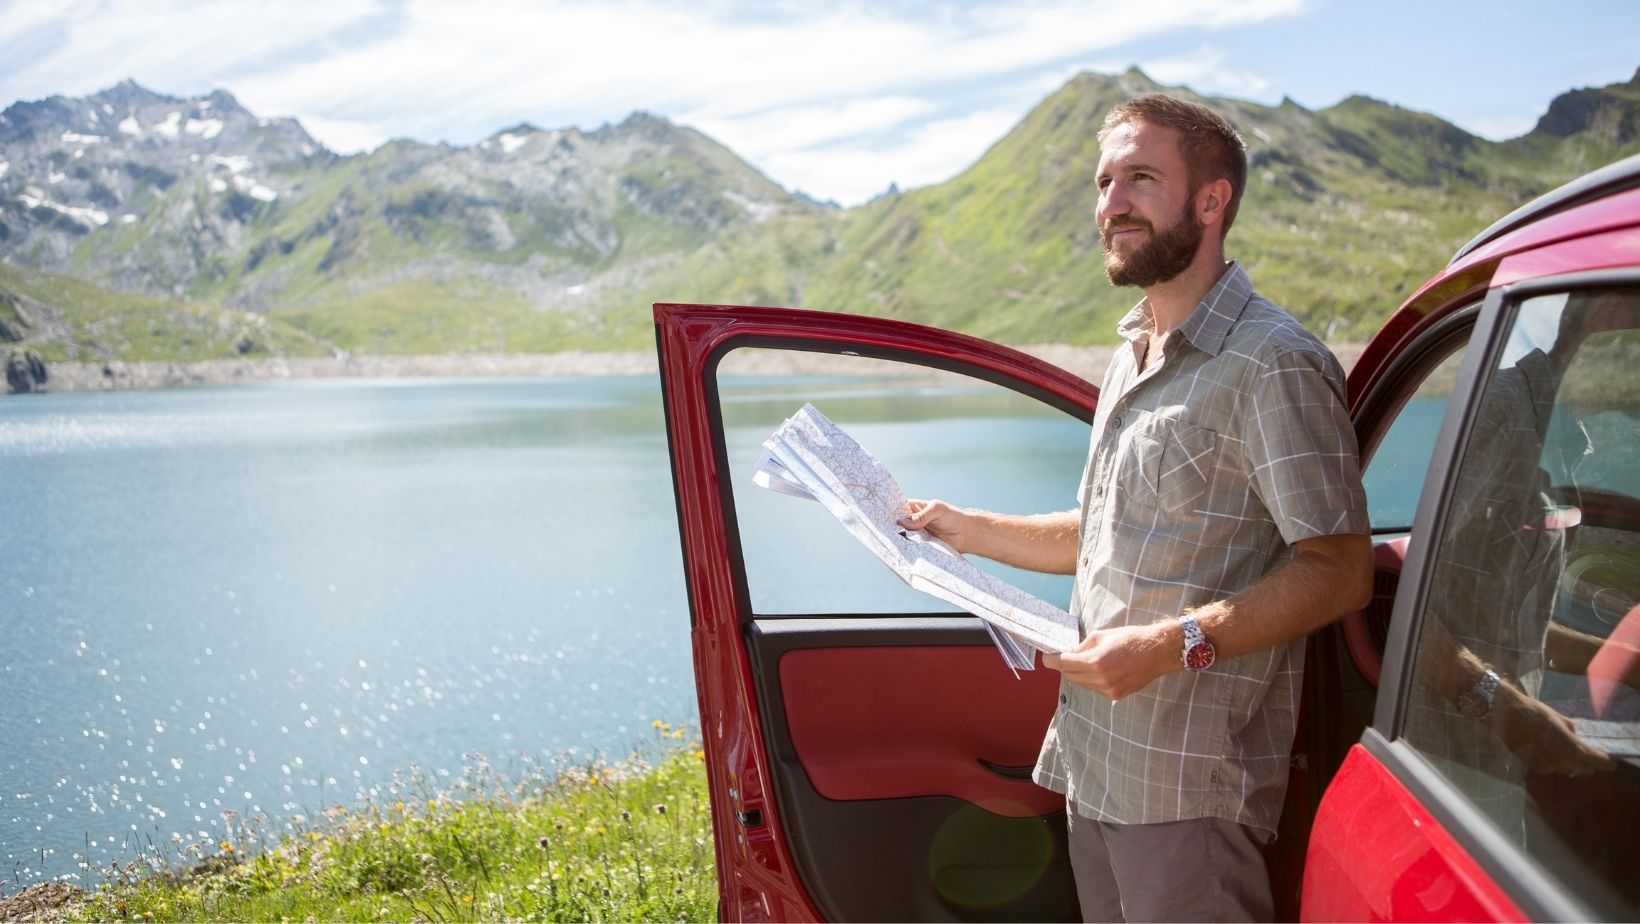 Renting a car or your own vehicle? What to choose when you go on vacation